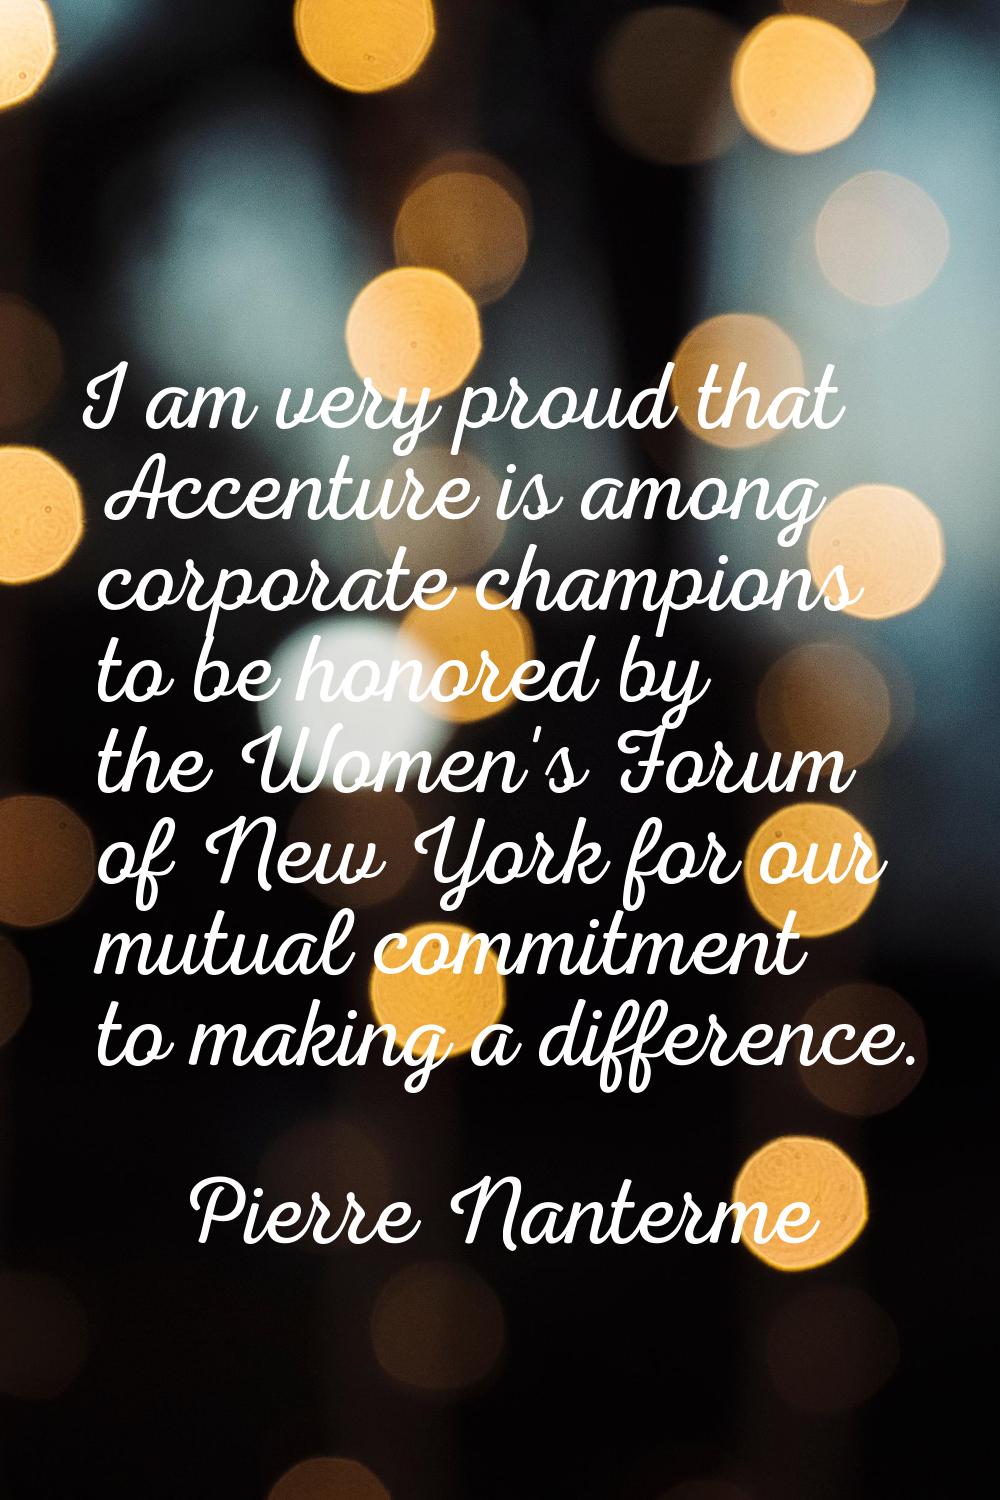 I am very proud that Accenture is among corporate champions to be honored by the Women's Forum of N